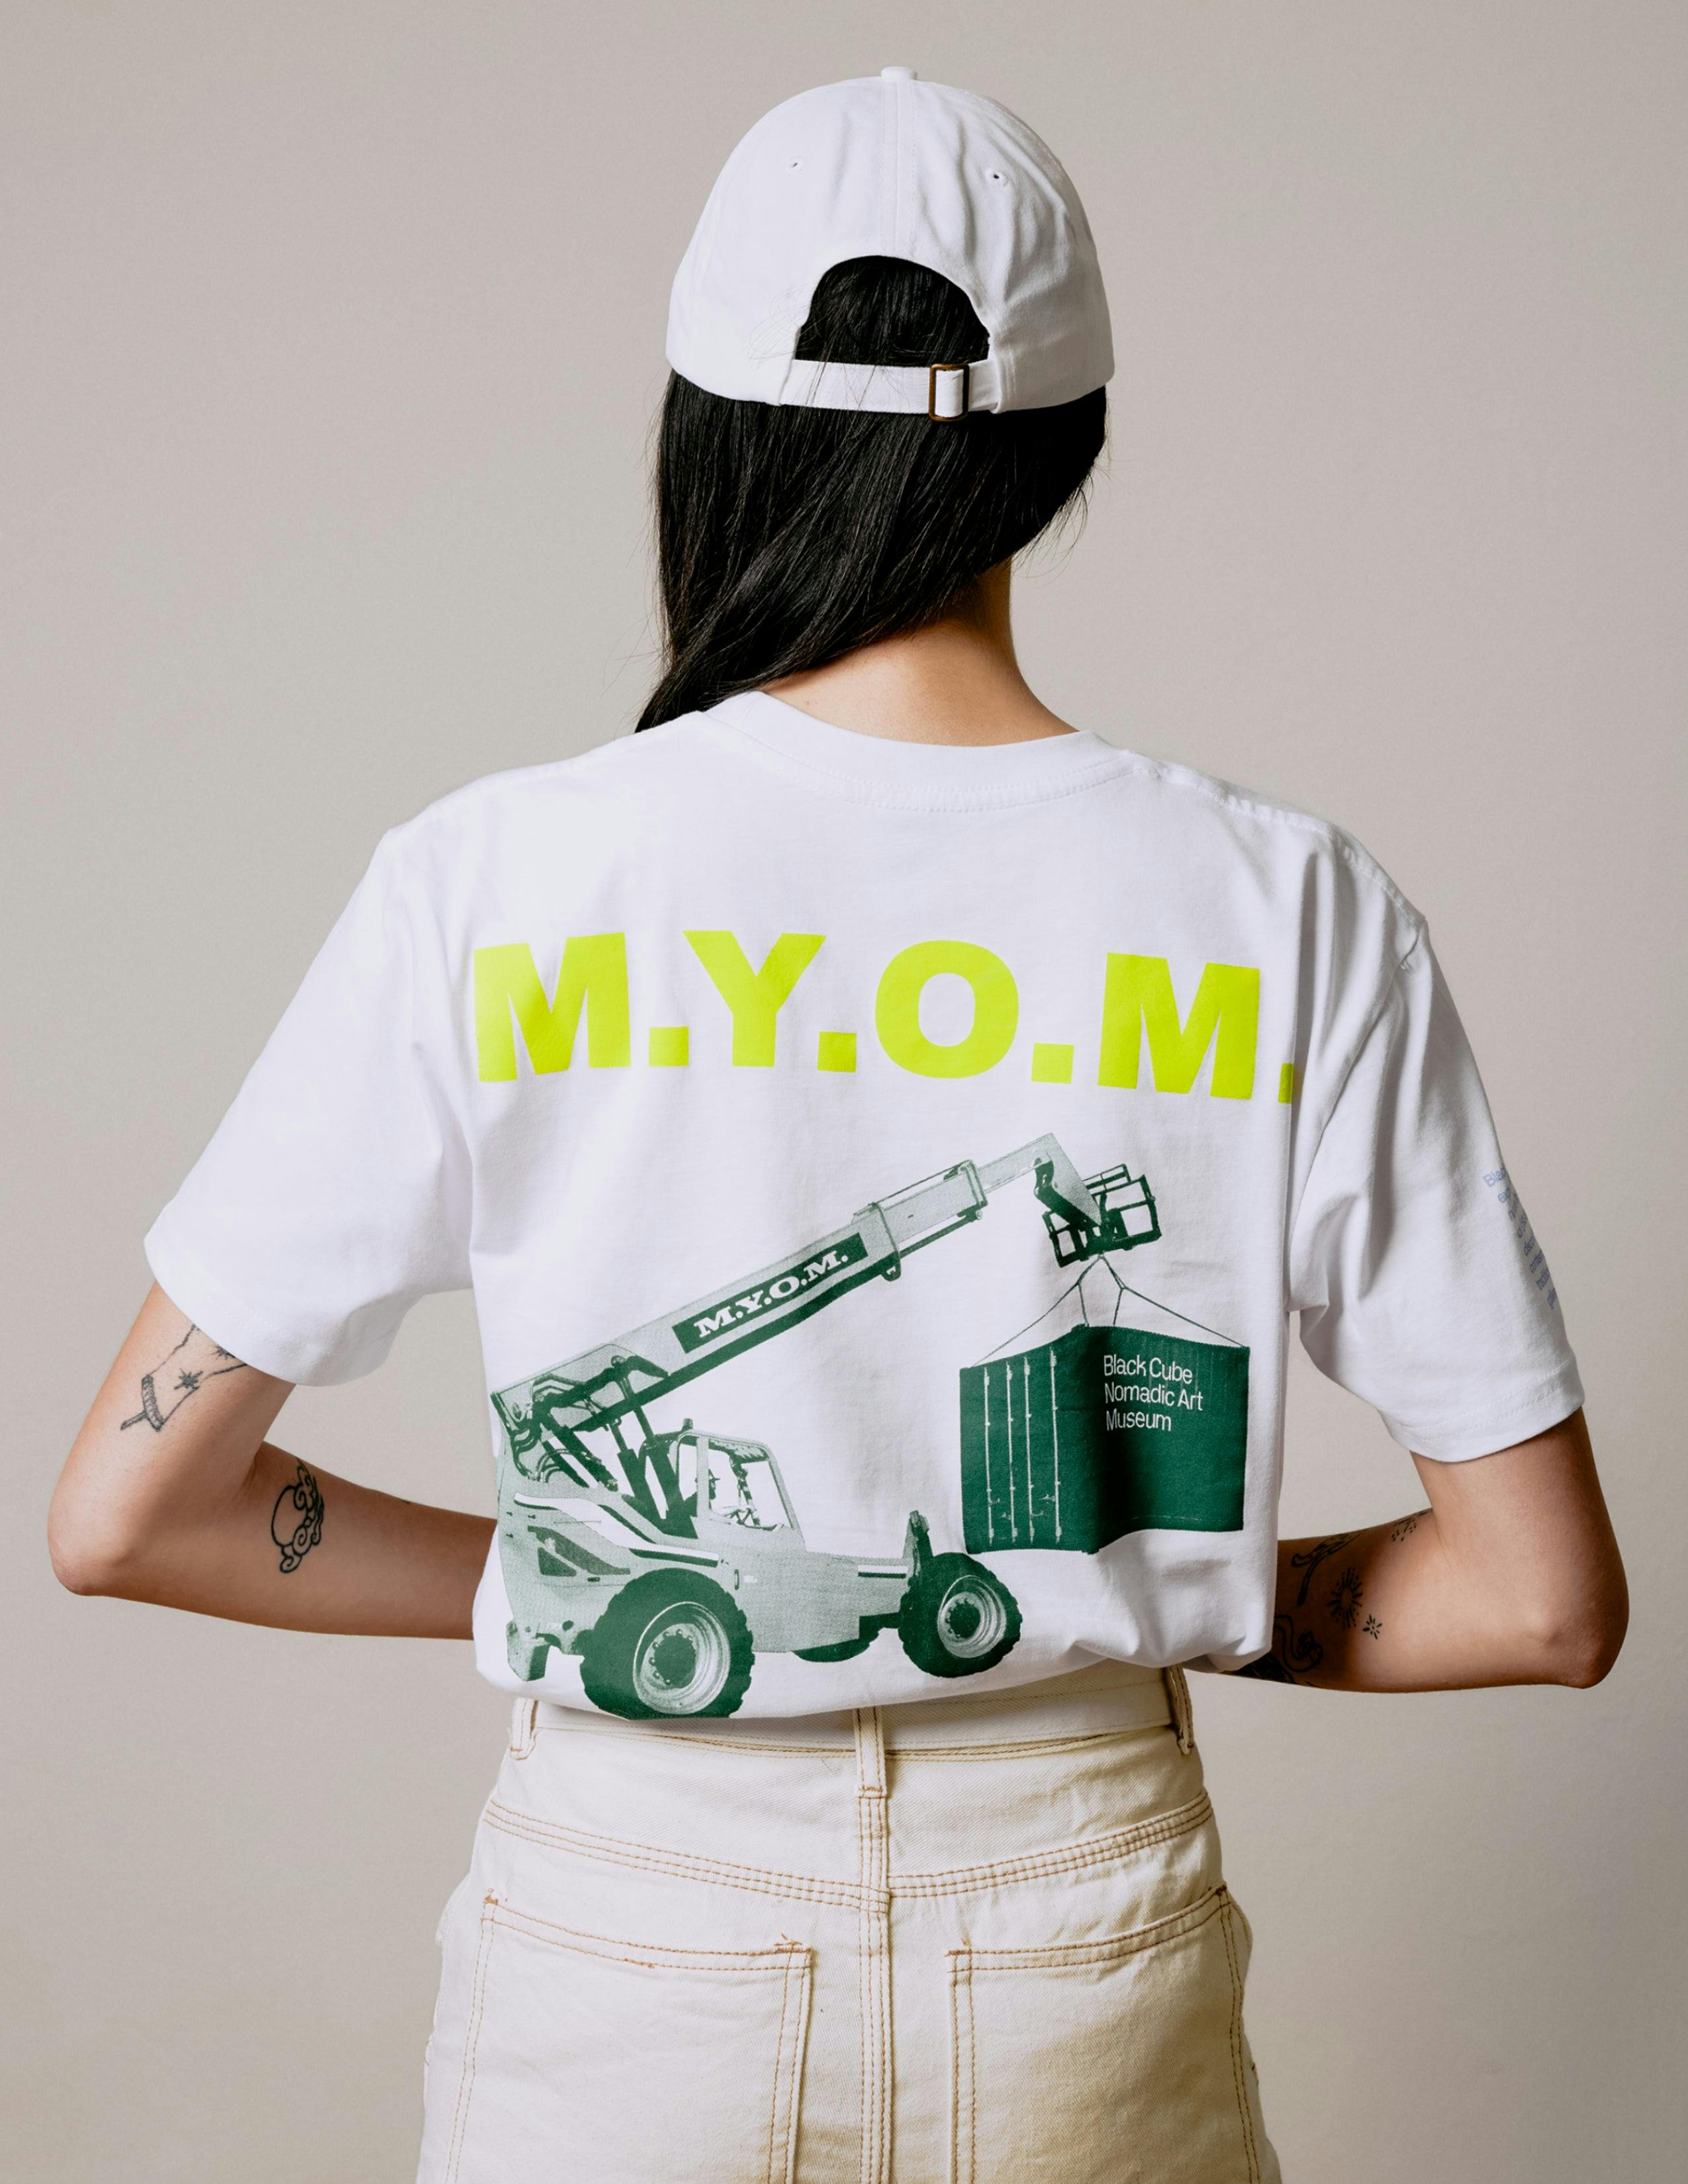 Make Your Own Museum (M.Y.O.M) T-shirt